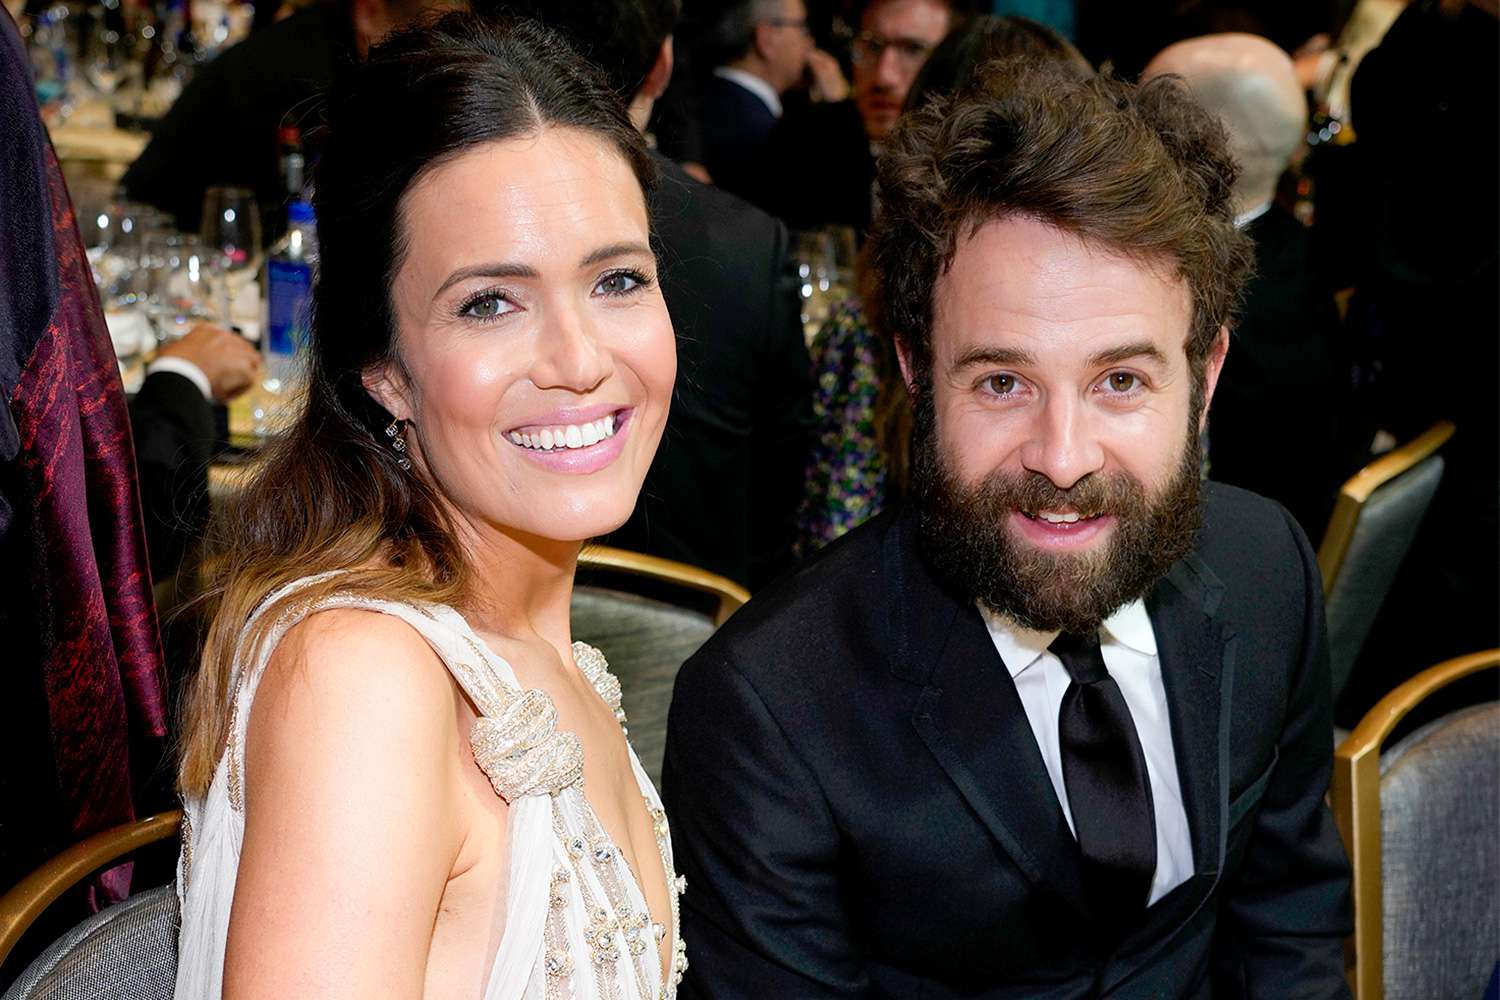 Mandy Moore and Taylor Goldsmith’s Relationship Timeline